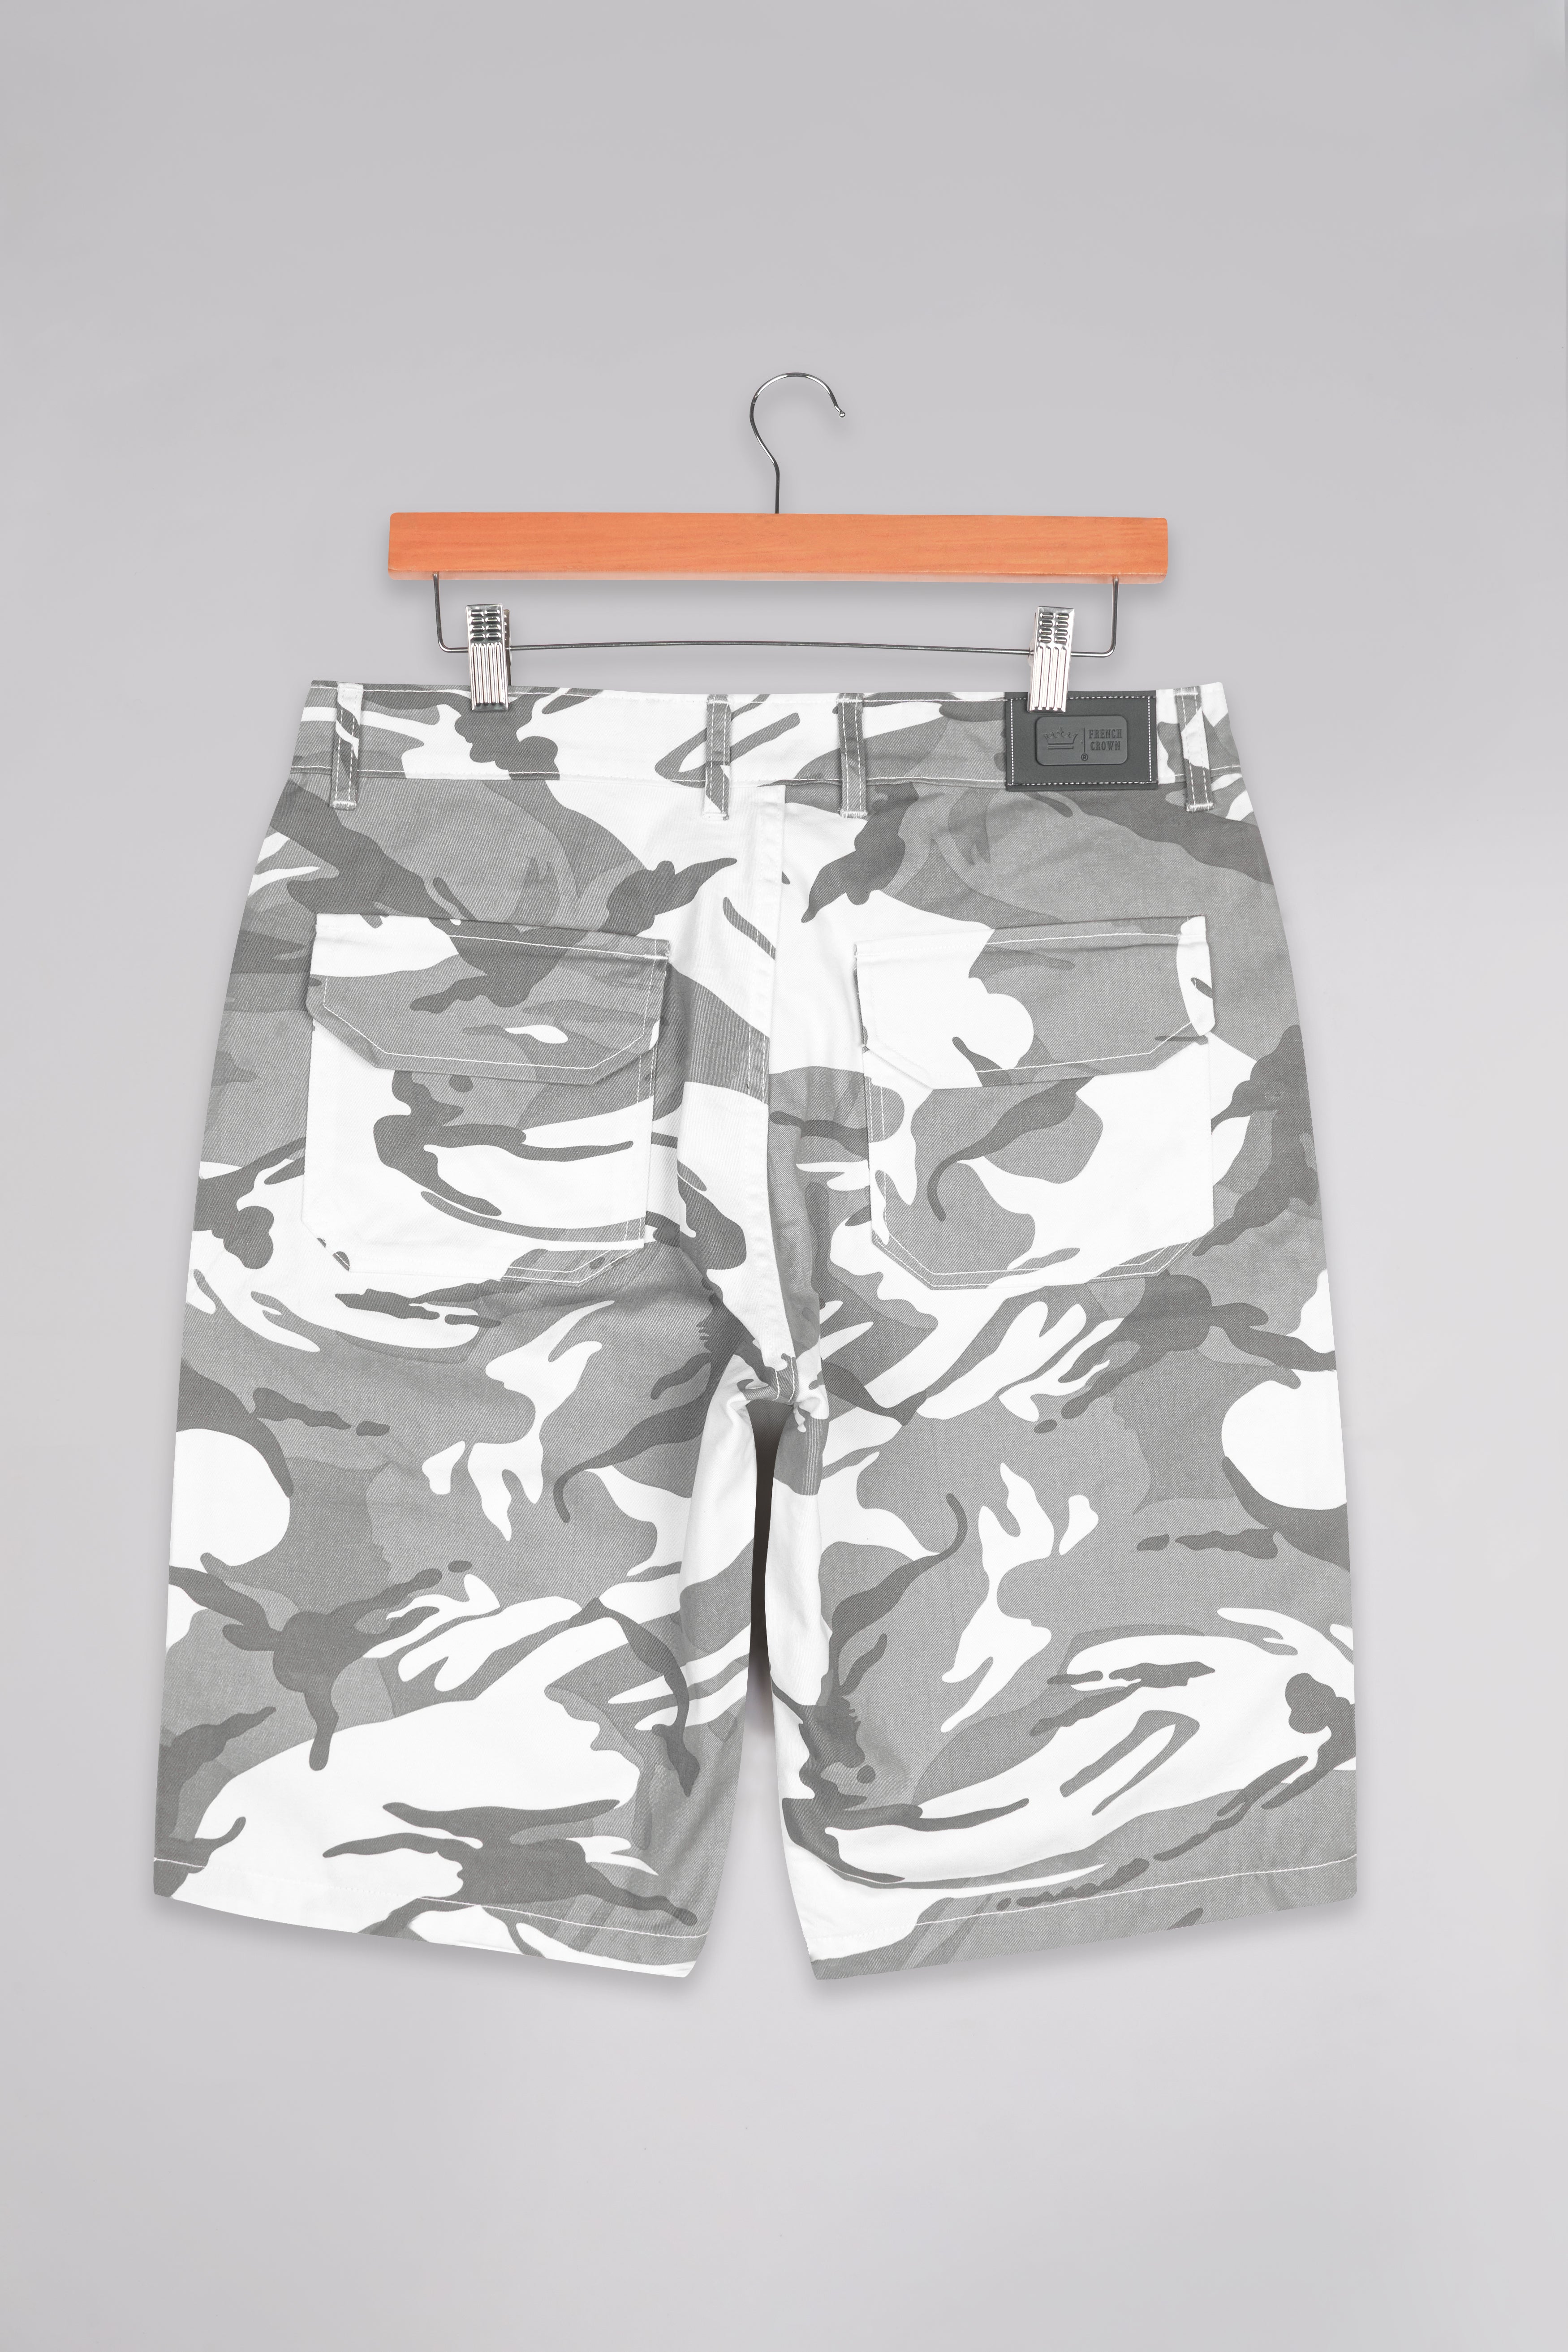 Bright White and Mist Gray Camouflage Cargo Shorts SR279-28, SR279-30, SR279-32, SR279-34, SR279-36, SR279-38, SR279-40, SR279-42, SR279-44